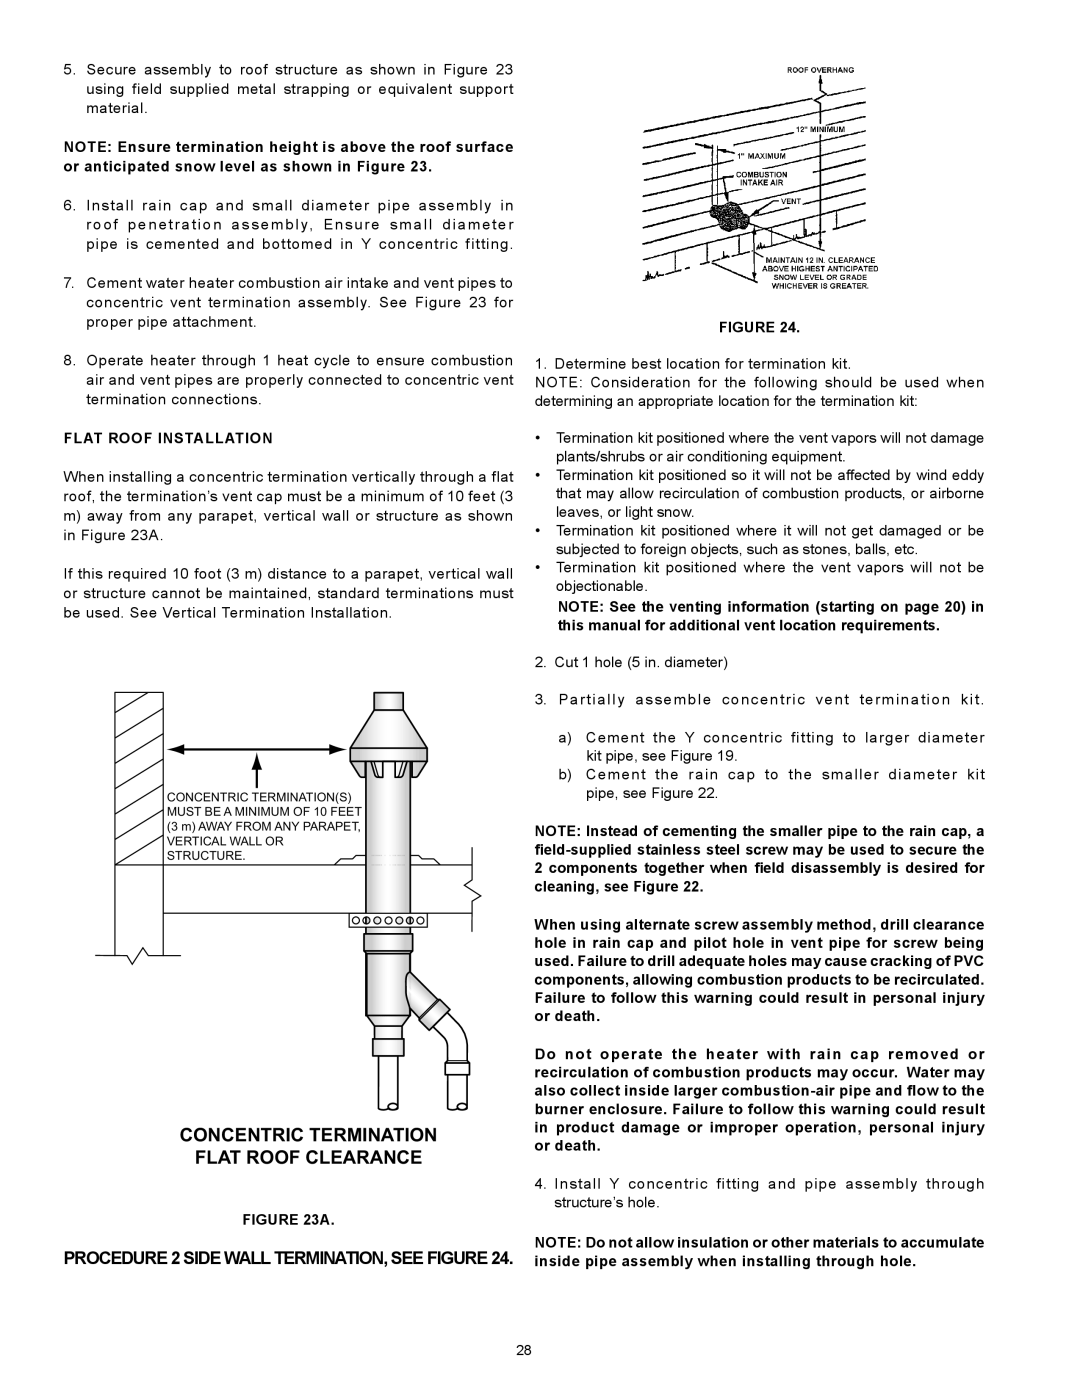 American Water Heater VG6250T100 Concentric Termination Flat Roof Clearance, PROCEDURE 2 SIDE WALL TERMINATION, see Figure 